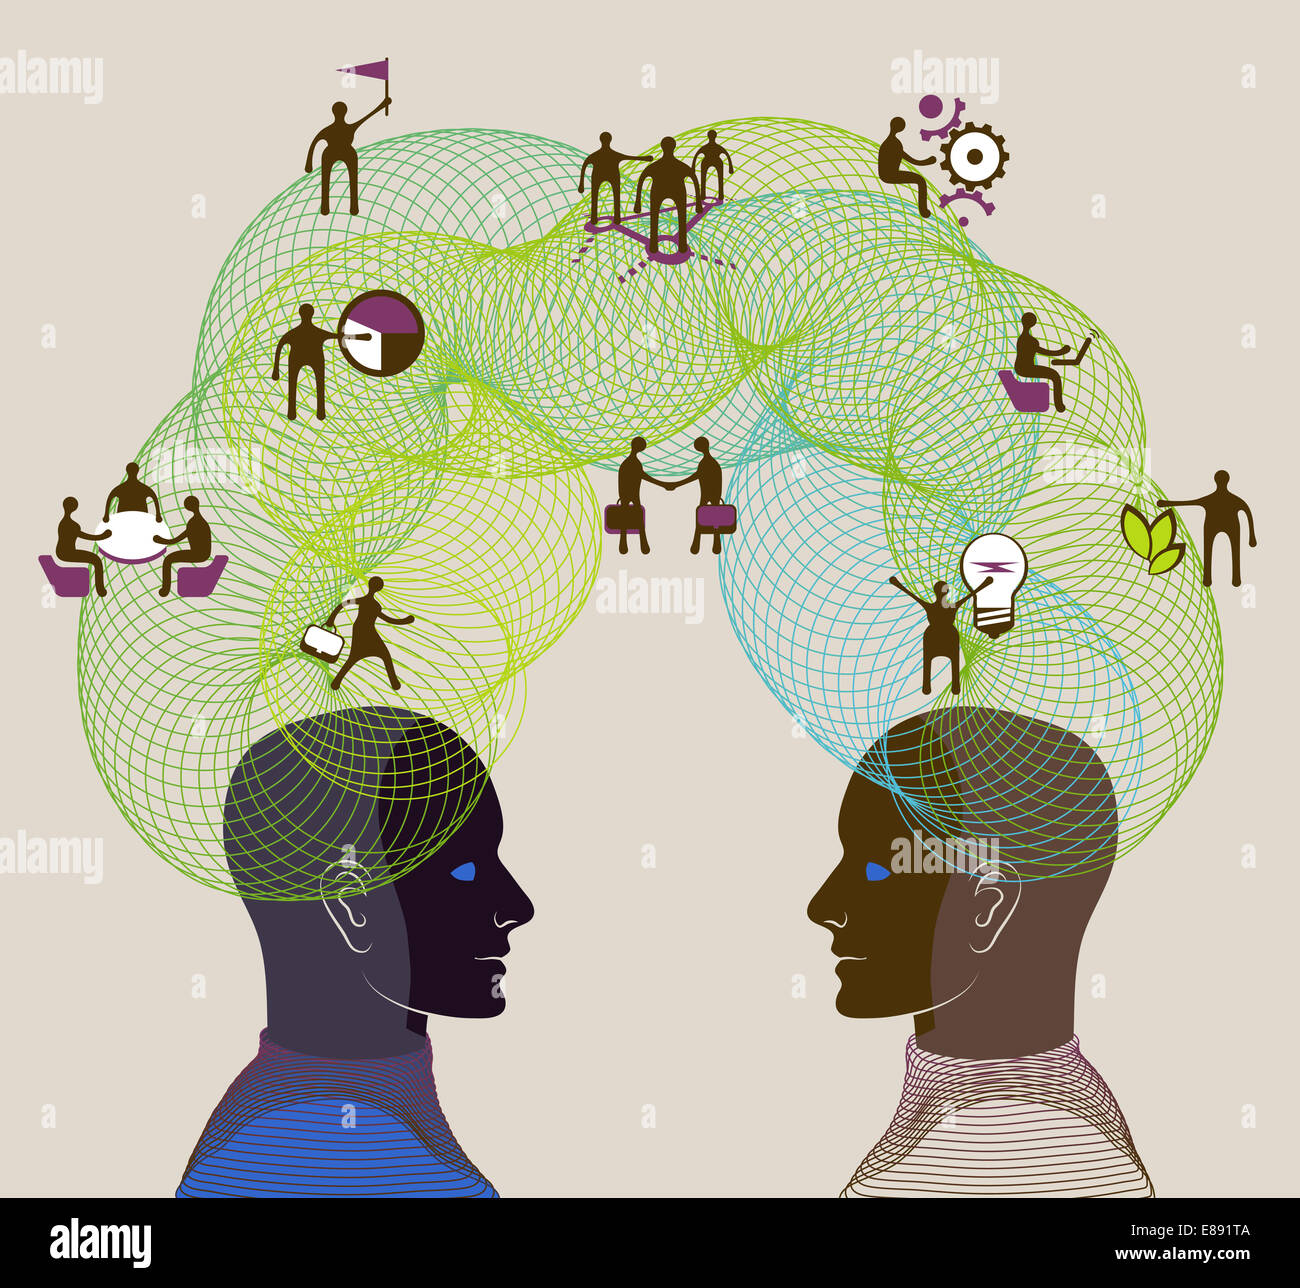 Business concept. Illustration of collaboration, teamwork and creative thinking Stock Photo